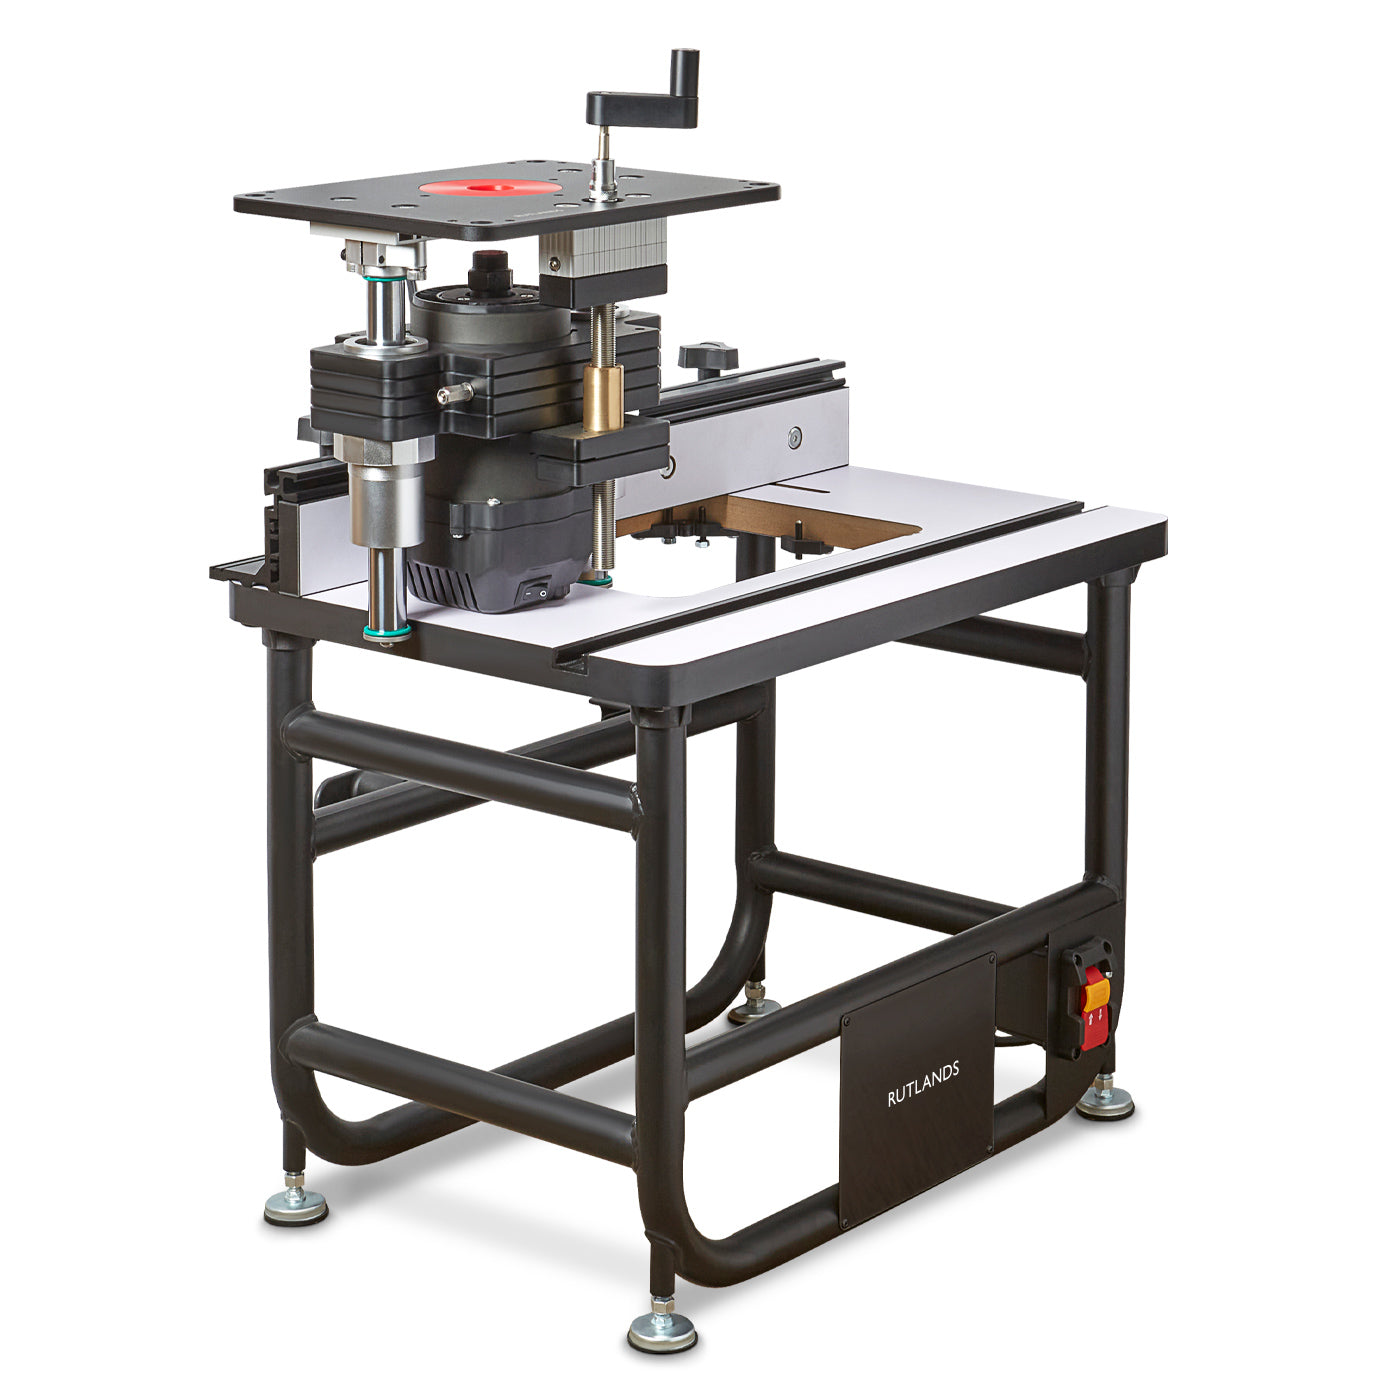 Bench Router Table - R15 Lift and Motor